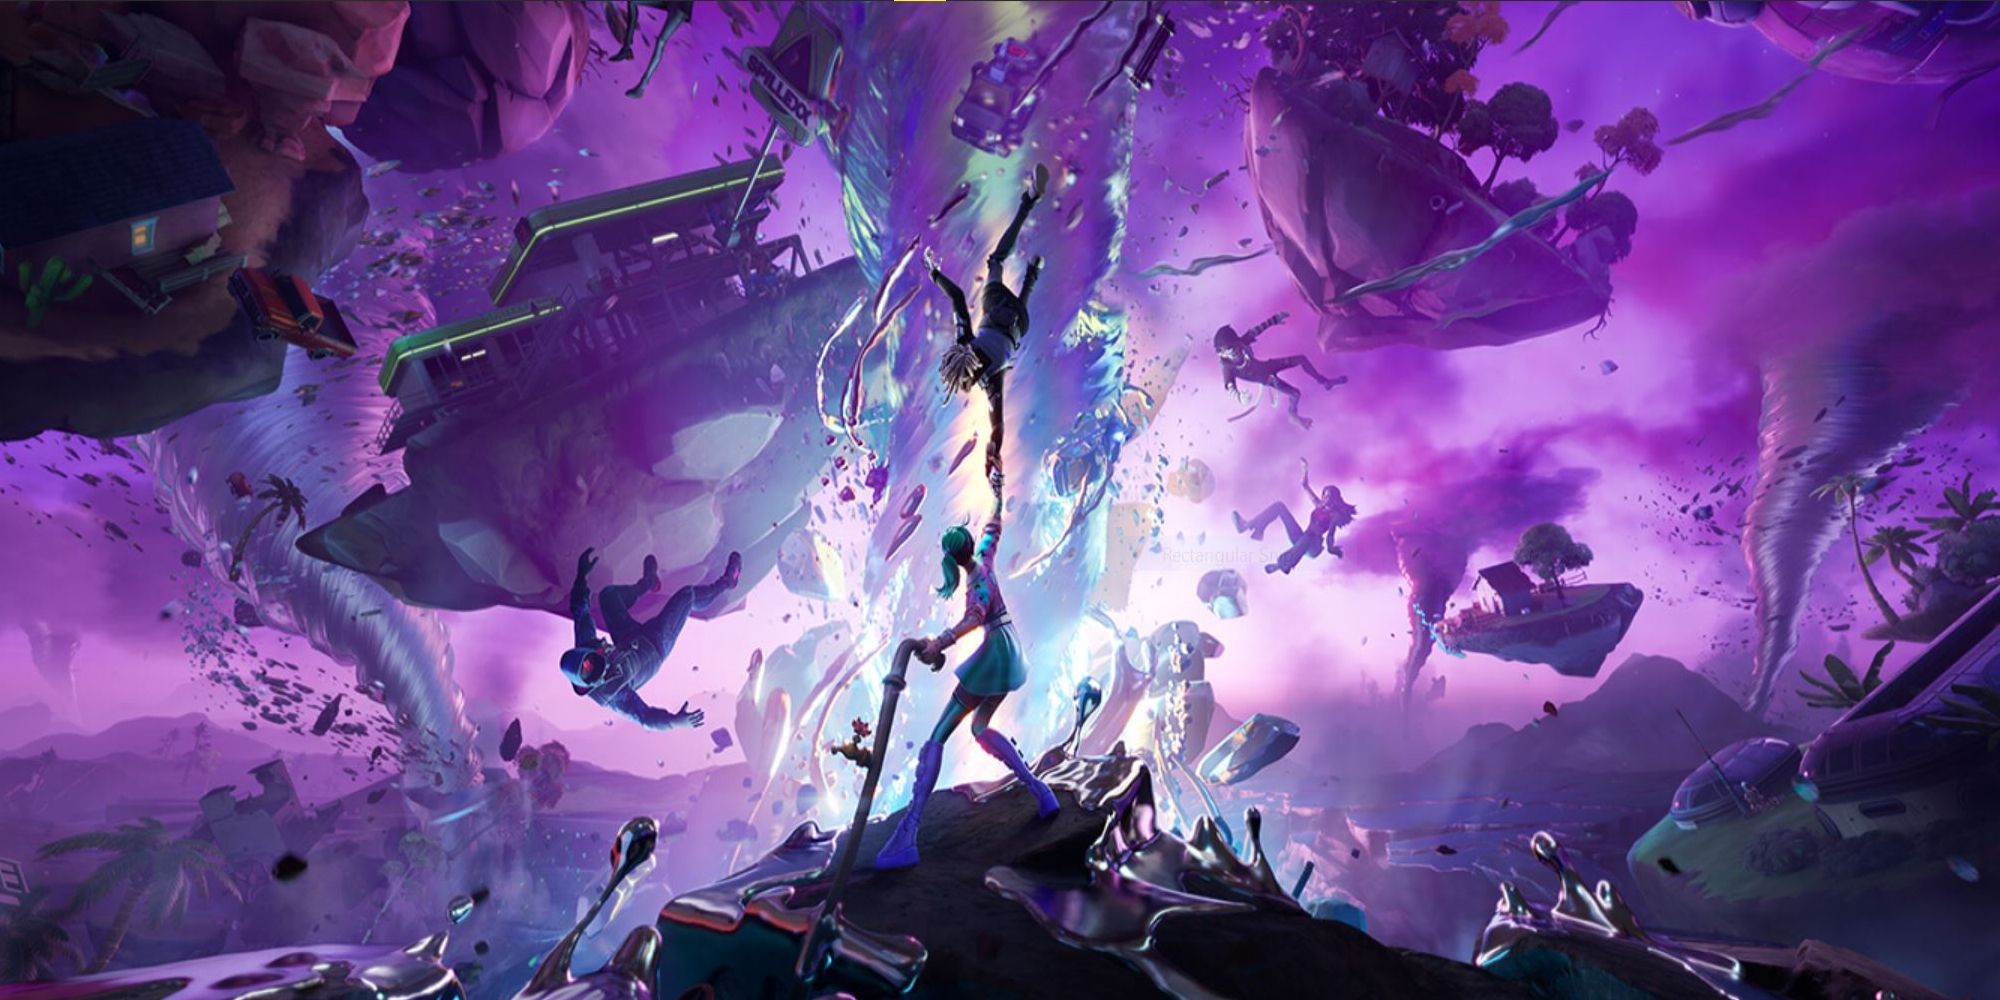 Official Fortnite Chapter 3 final event art, where the landscape is torn apart by an anomaly.